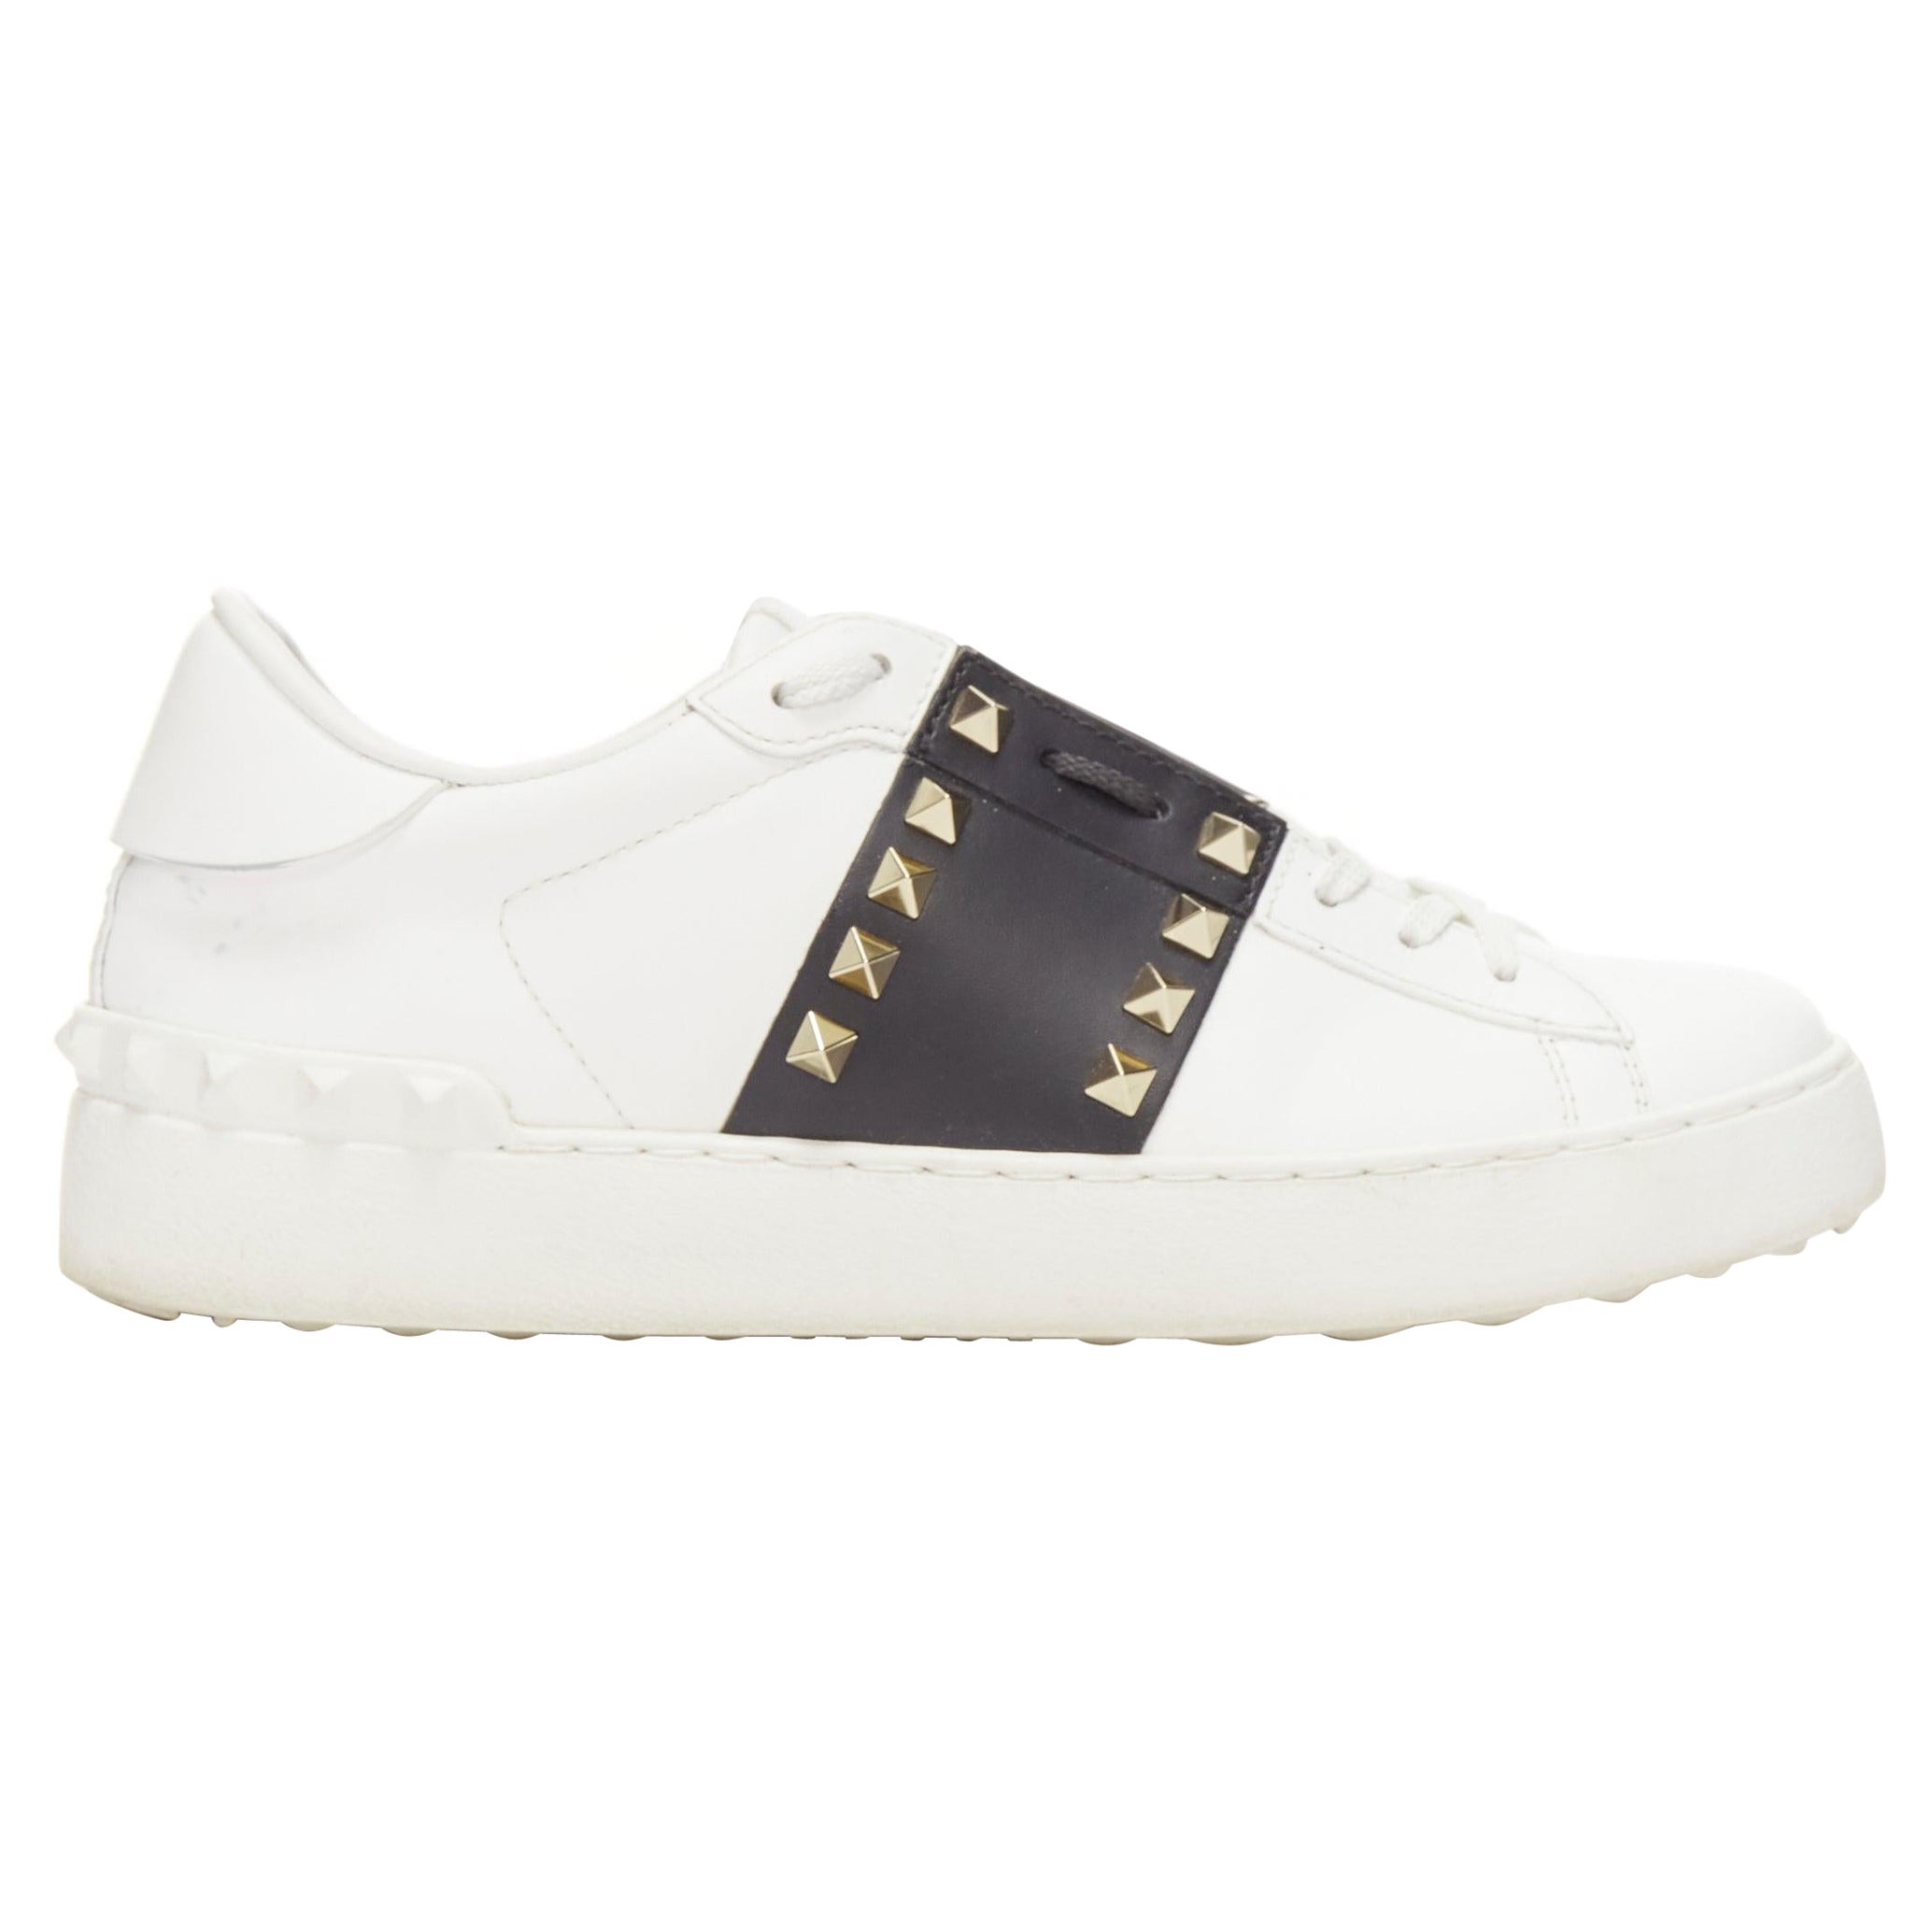 VALENTINO Rockstud Untitled Open black white leather studded sneakers EU37 For Sale